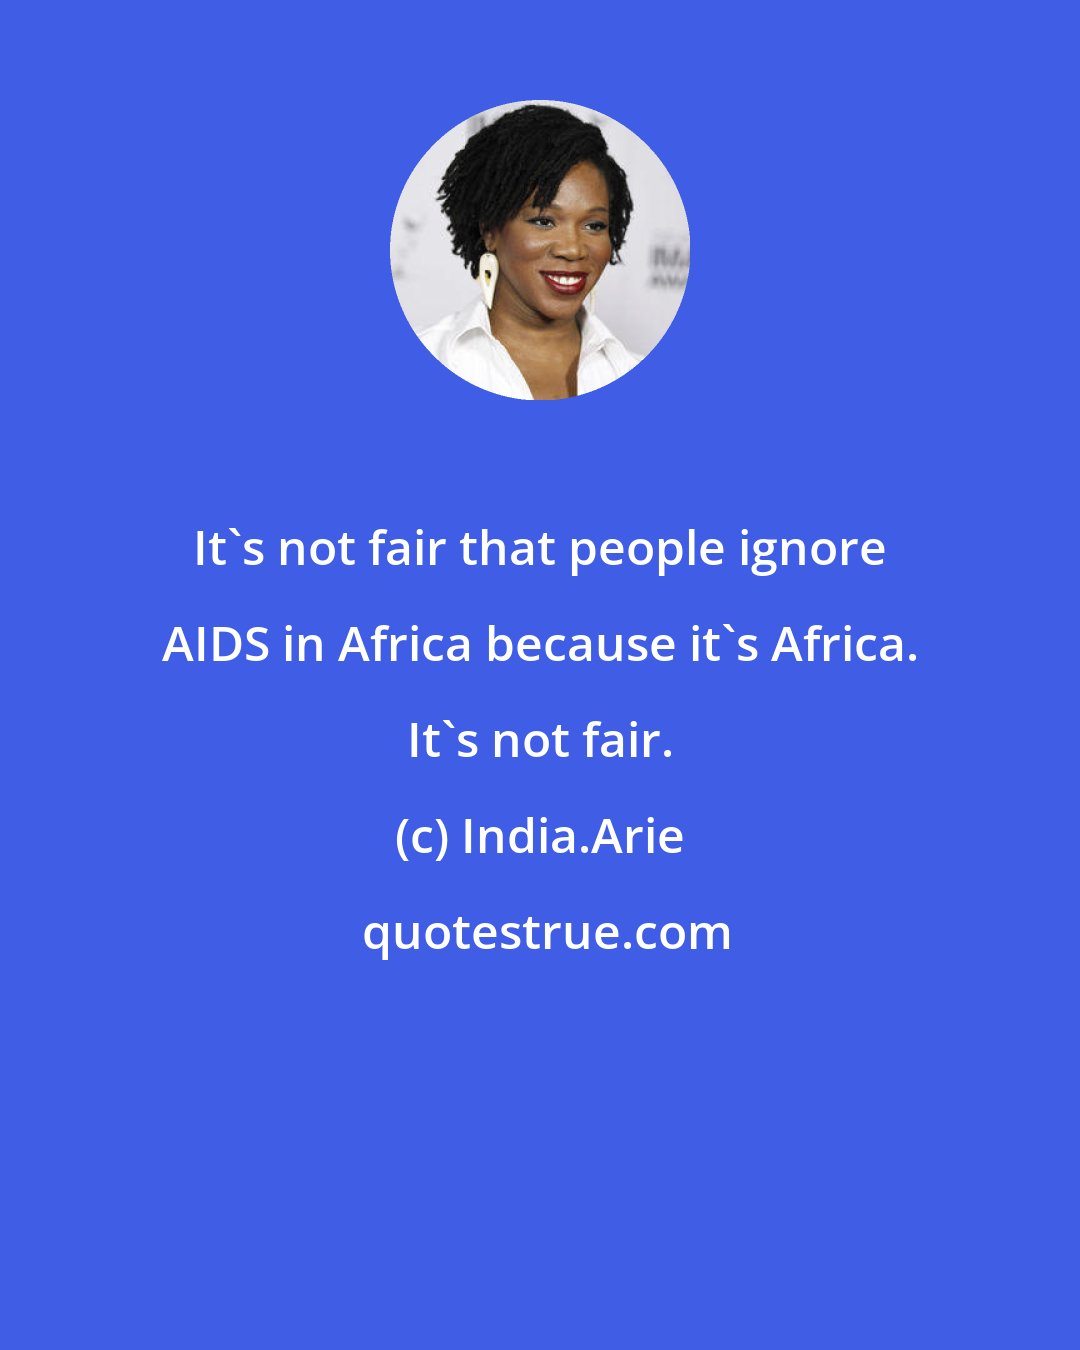 India.Arie: It's not fair that people ignore AIDS in Africa because it's Africa. It's not fair.